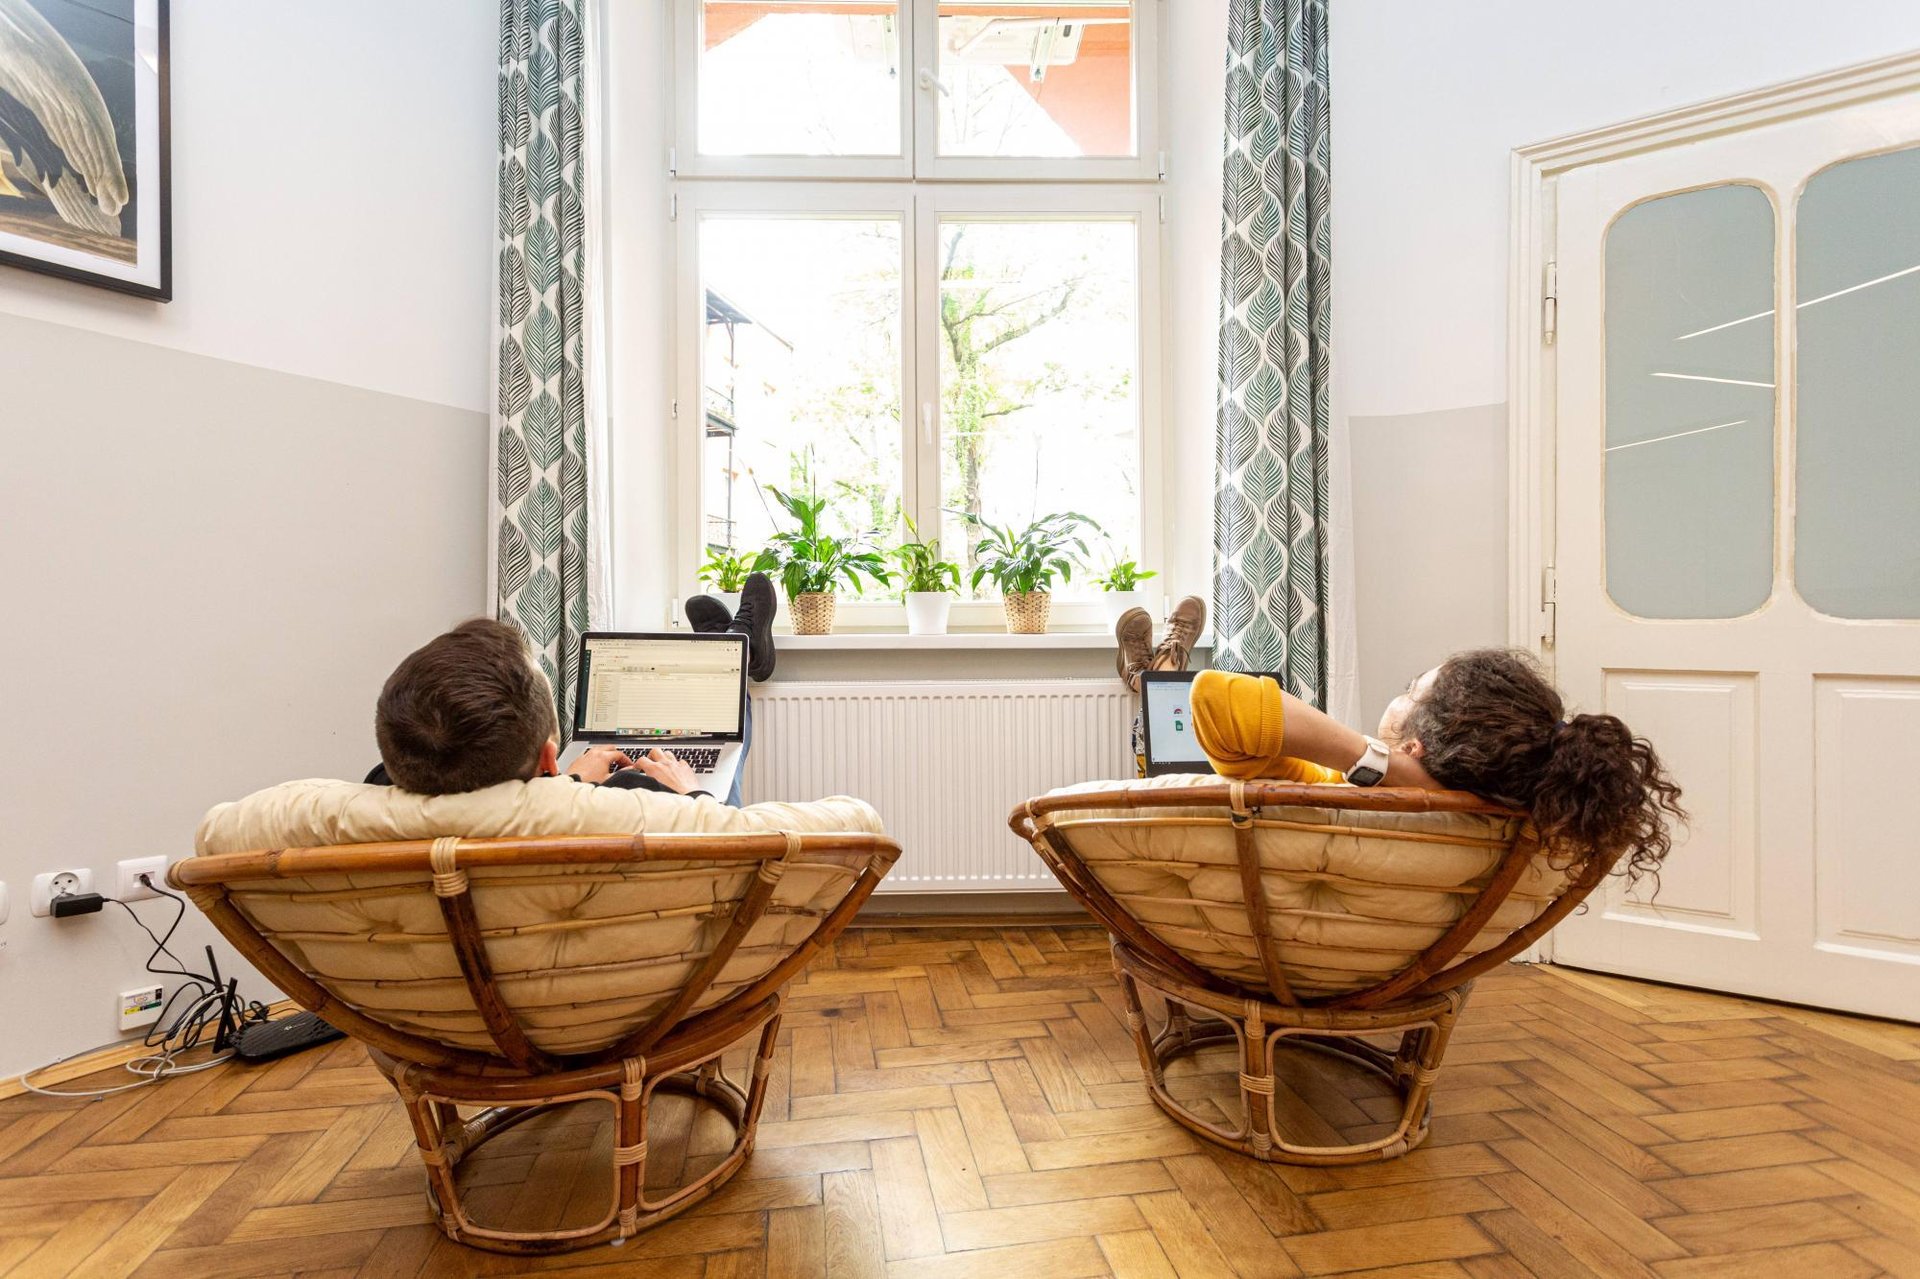 Interior of Kalafiornia Coworking & Offices